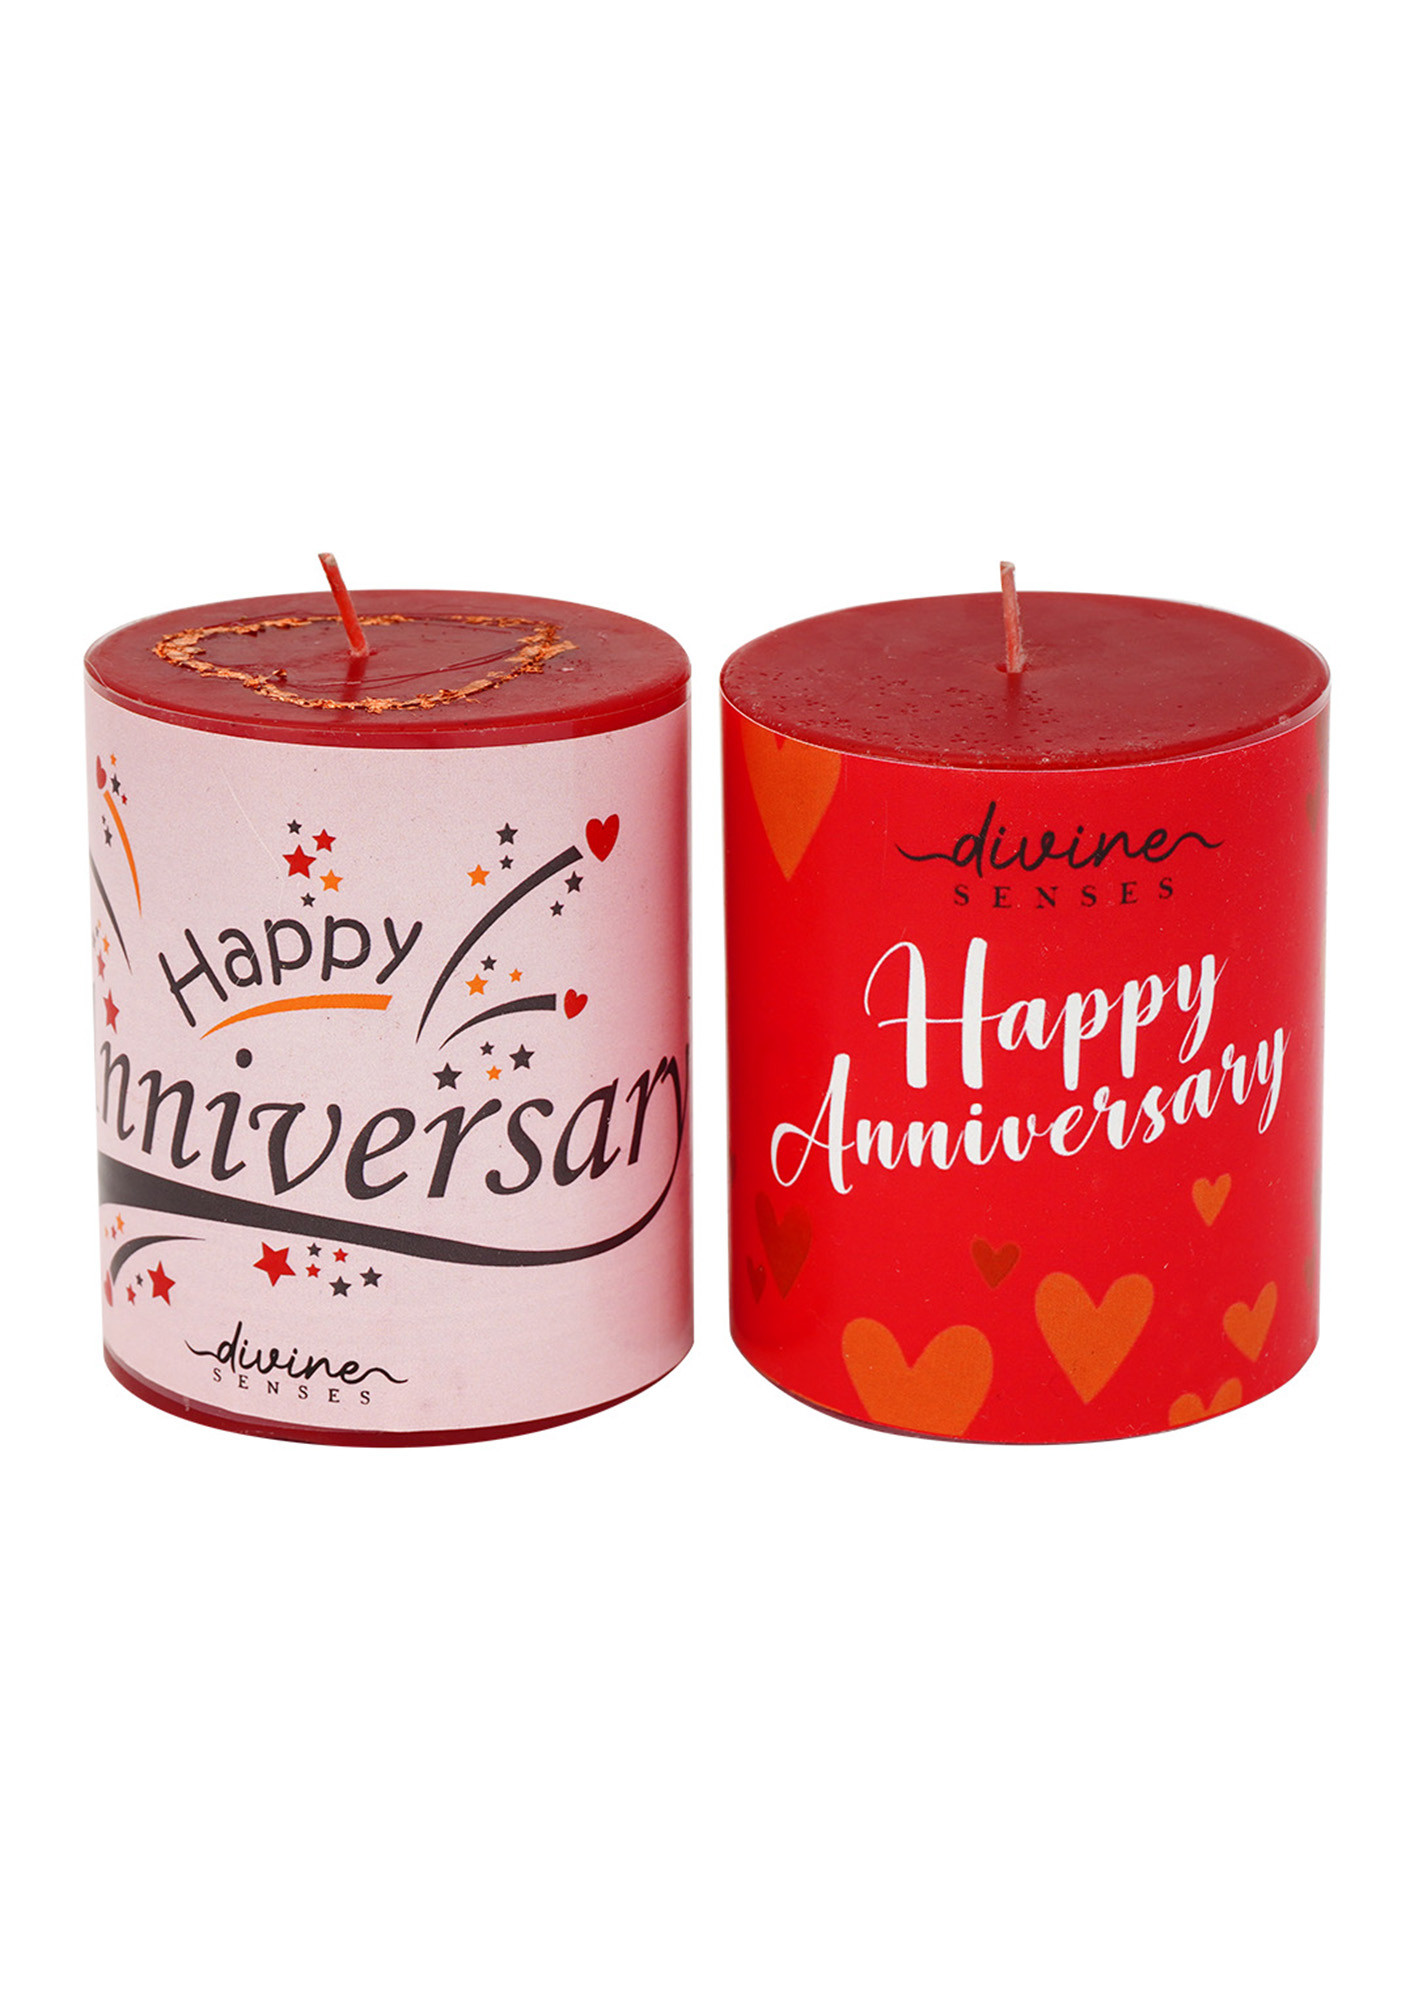 Birthday Wedding Anniversary Gift For Wife  Gifts for fiance, Wedding  anniversary gifts, Romantic gifts for wife